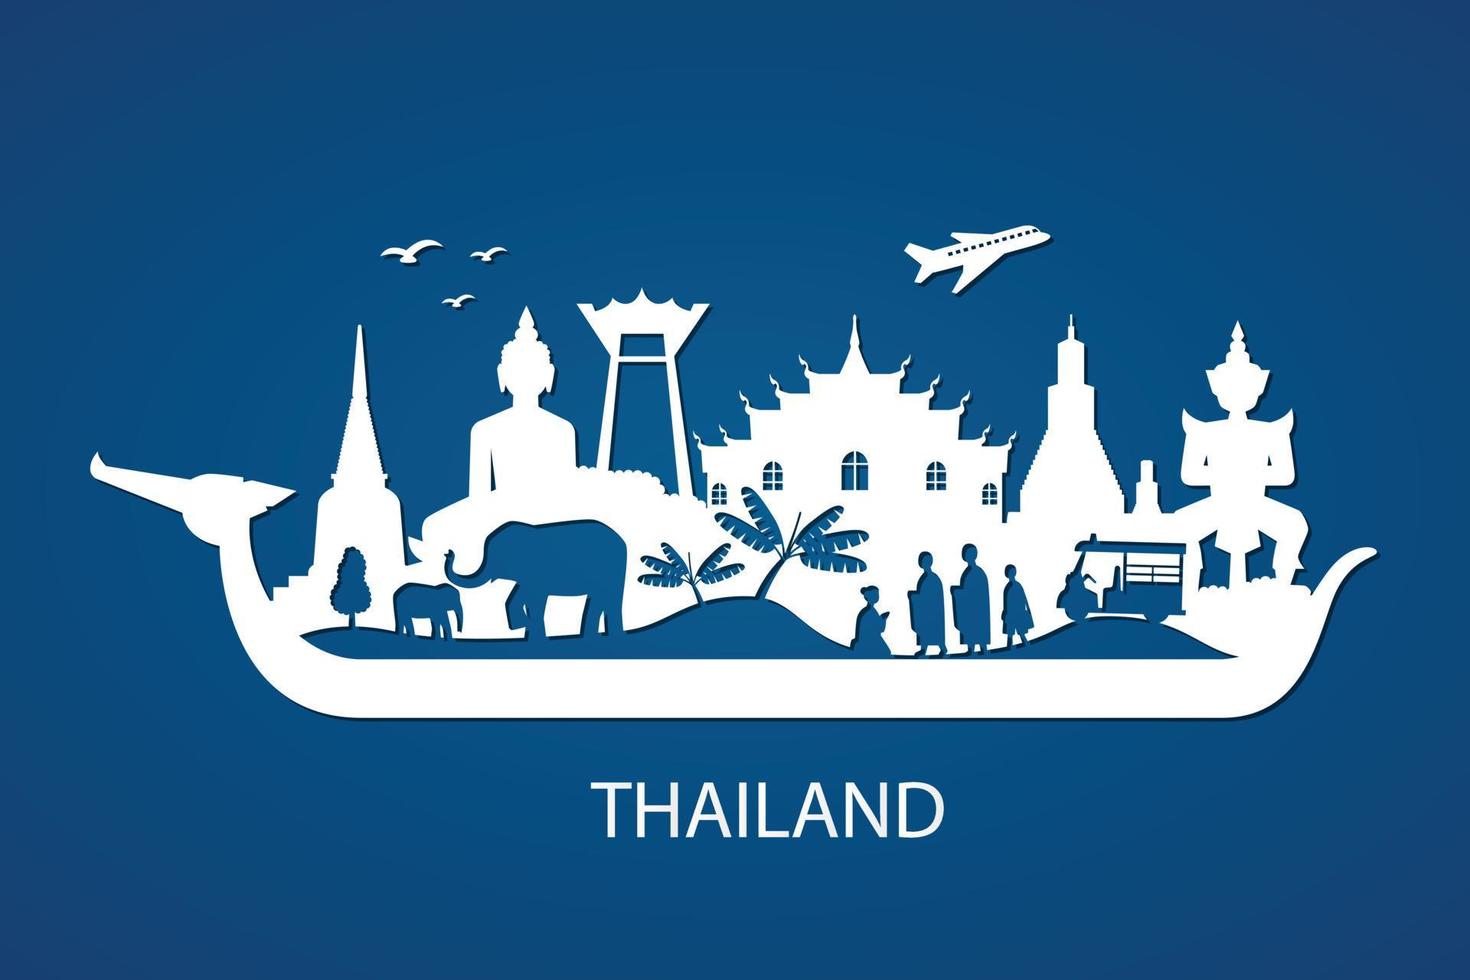 Thailand with famous landmarks in paper cut style vector illustration. Travel concept background.